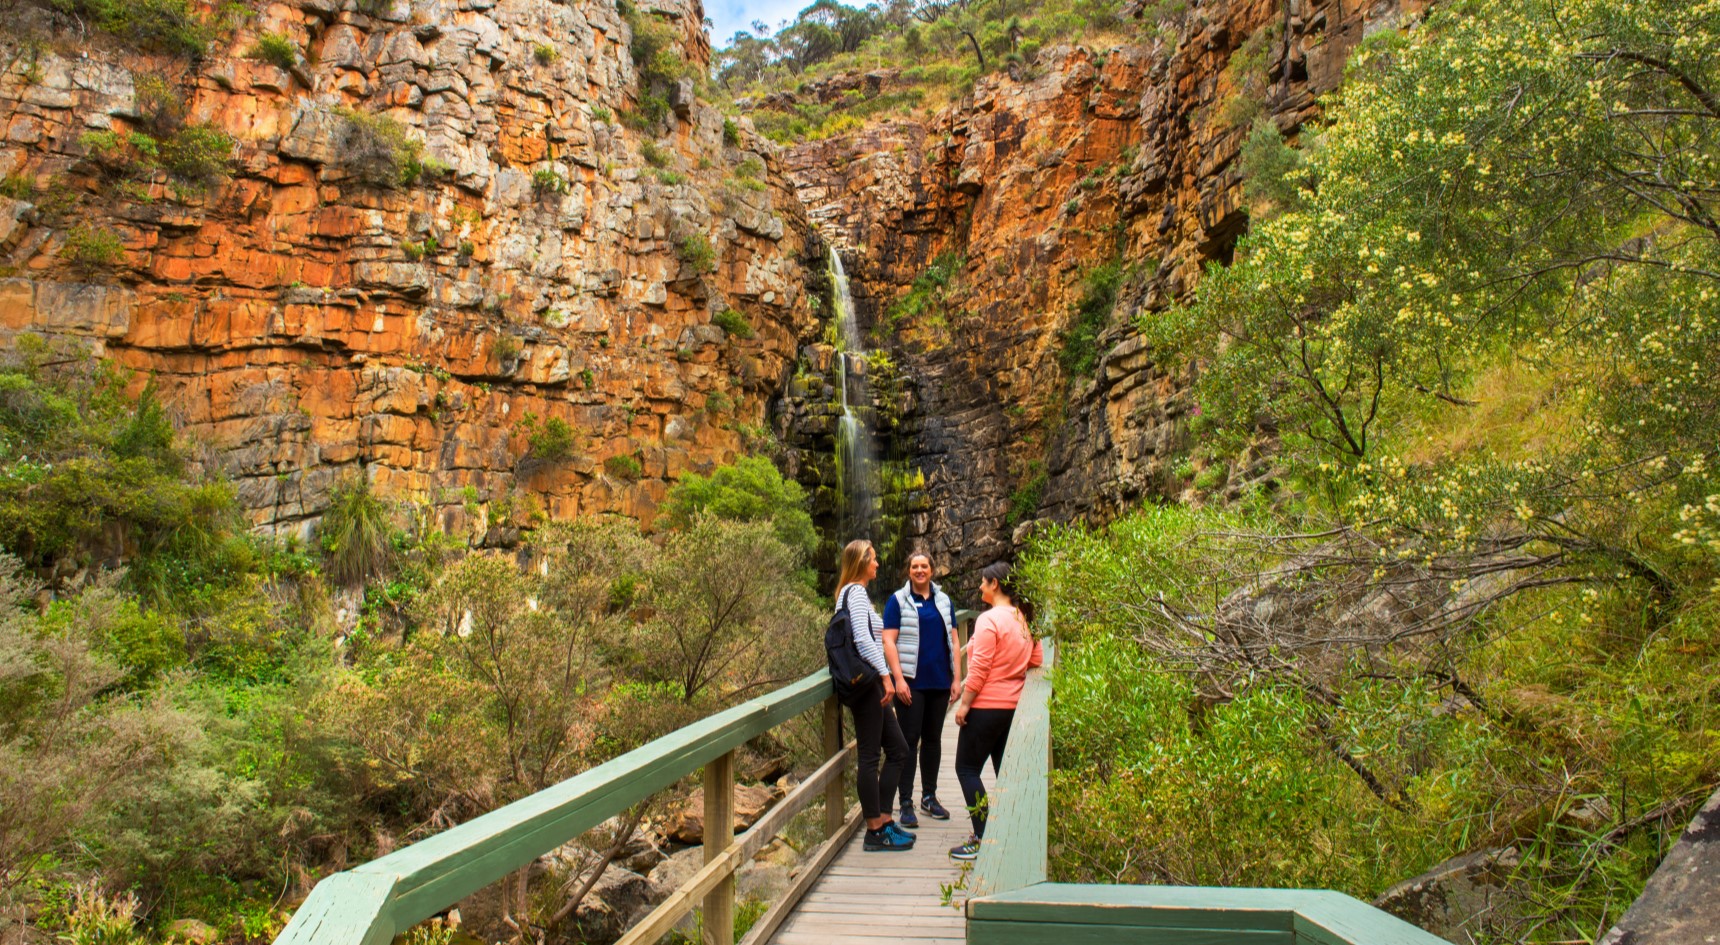 Morialta Conservation Park has a number of walking trails and picnic spots. Image: SATC/Adam Bruzzone